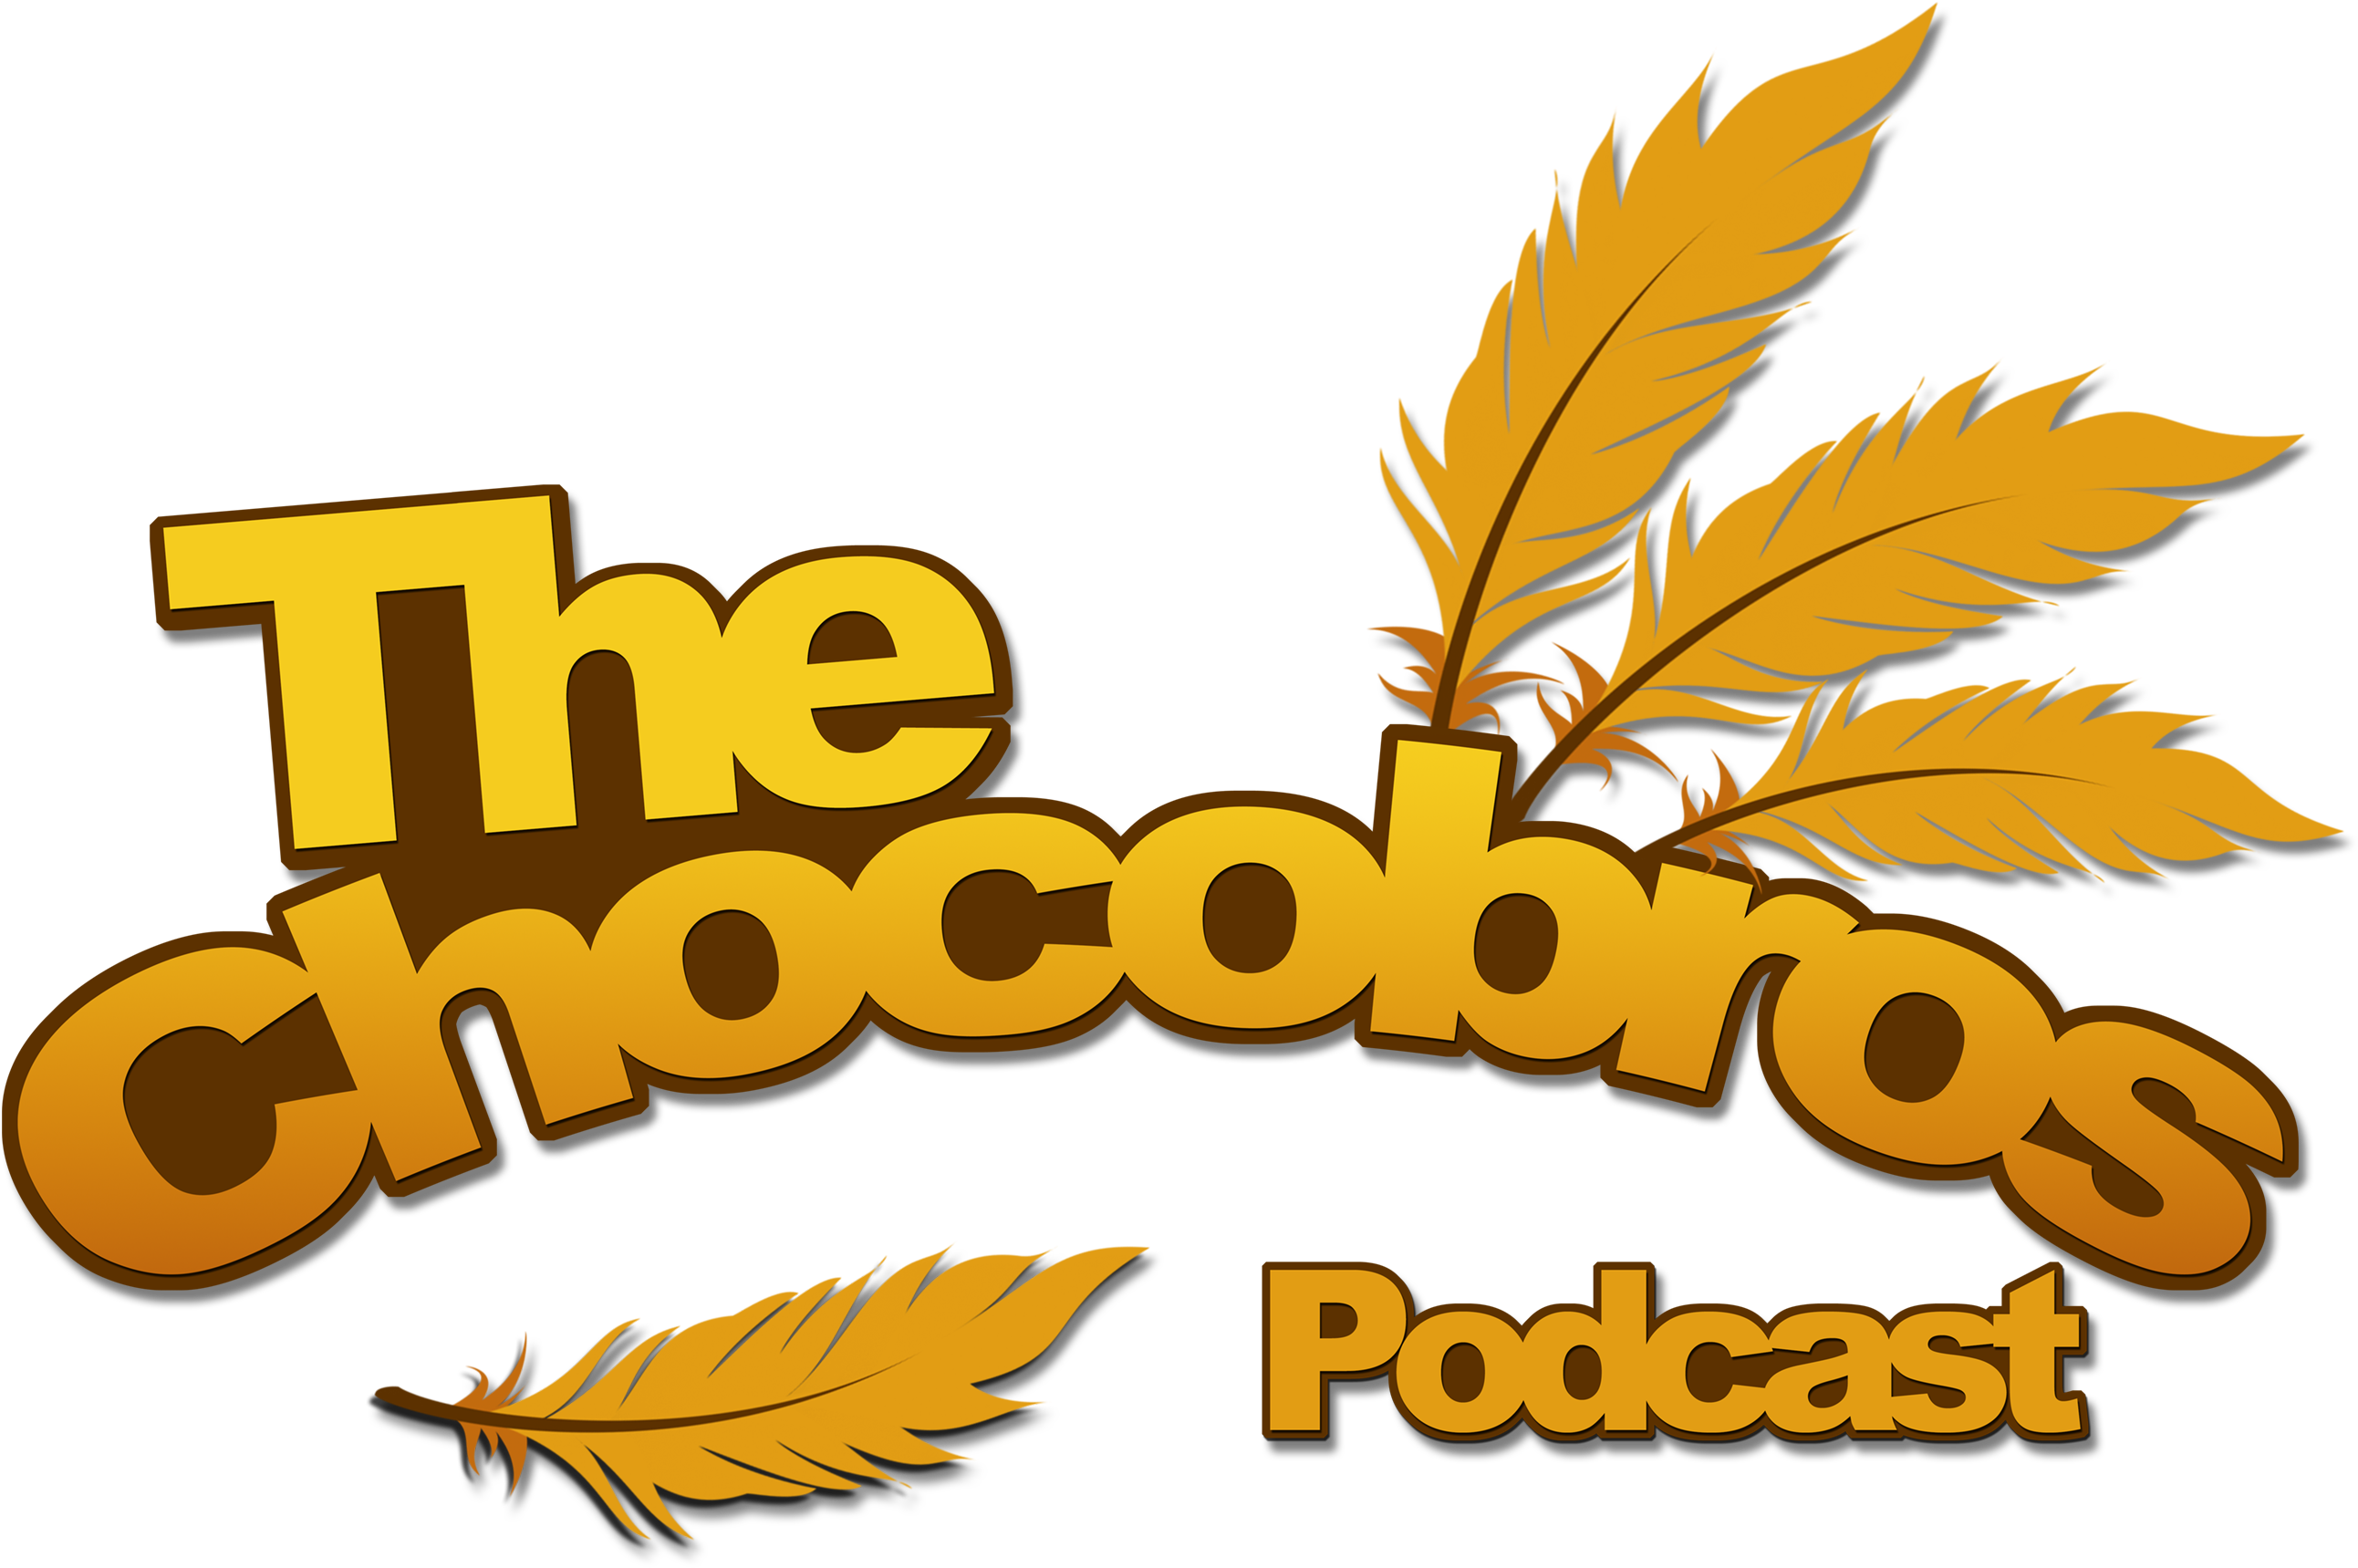 Chocobros Podcast Wfeathers V1 Wdropshadow W=772 - The Chocobros Podcast (2950x1950), Png Download